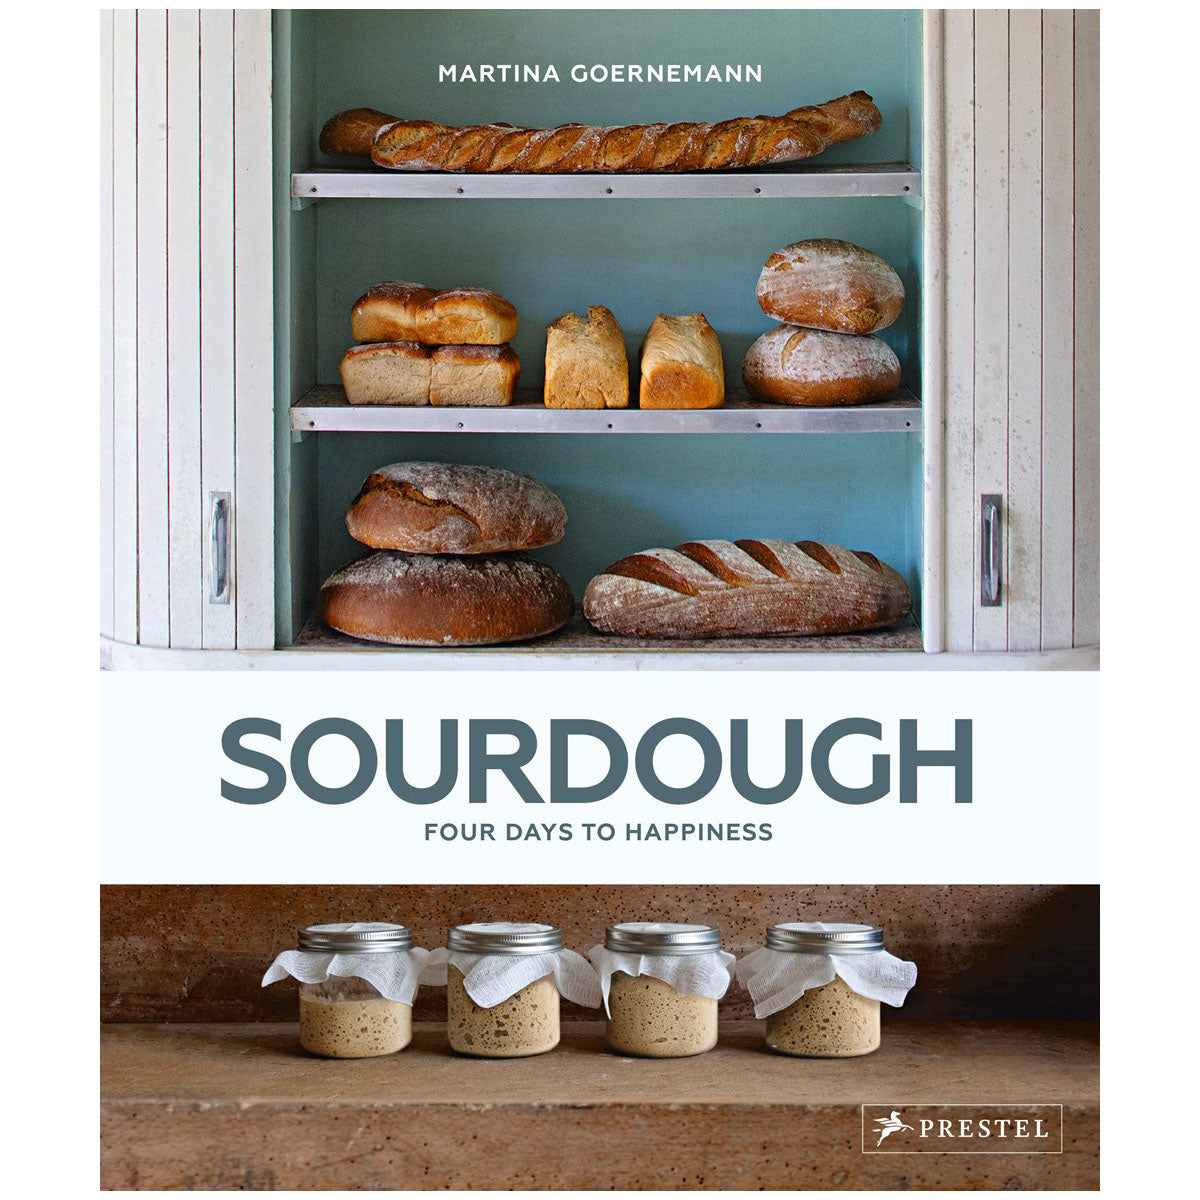 Load image into Gallery viewer, Sourdough - Martina Goernemann
